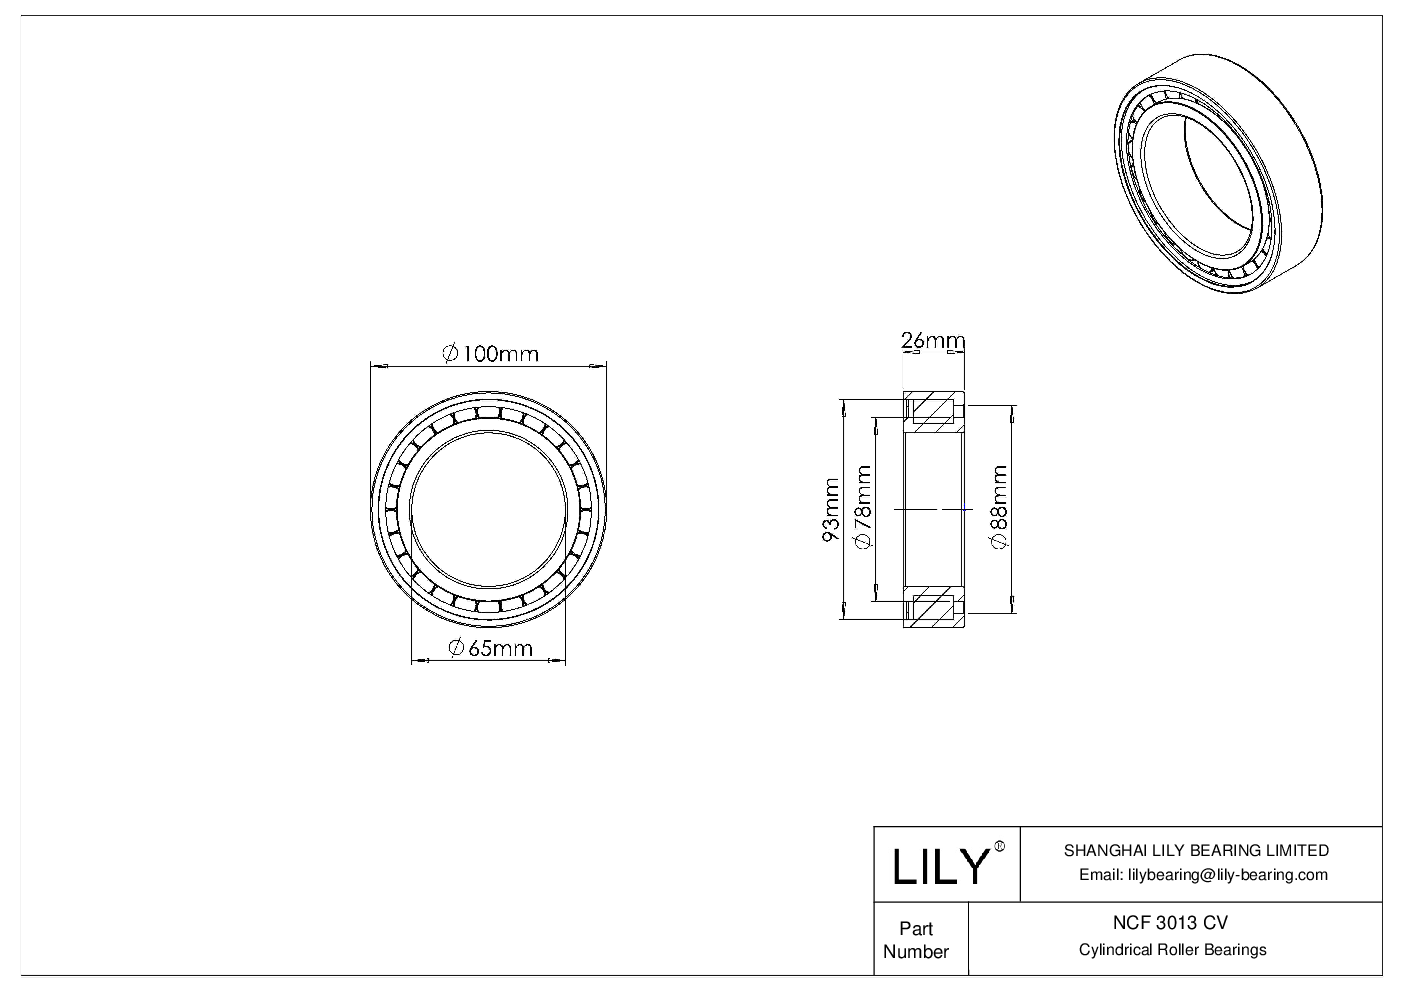 NCF 3013 CV Single Row Full Complement Cylindrical Roller Bearings cad drawing